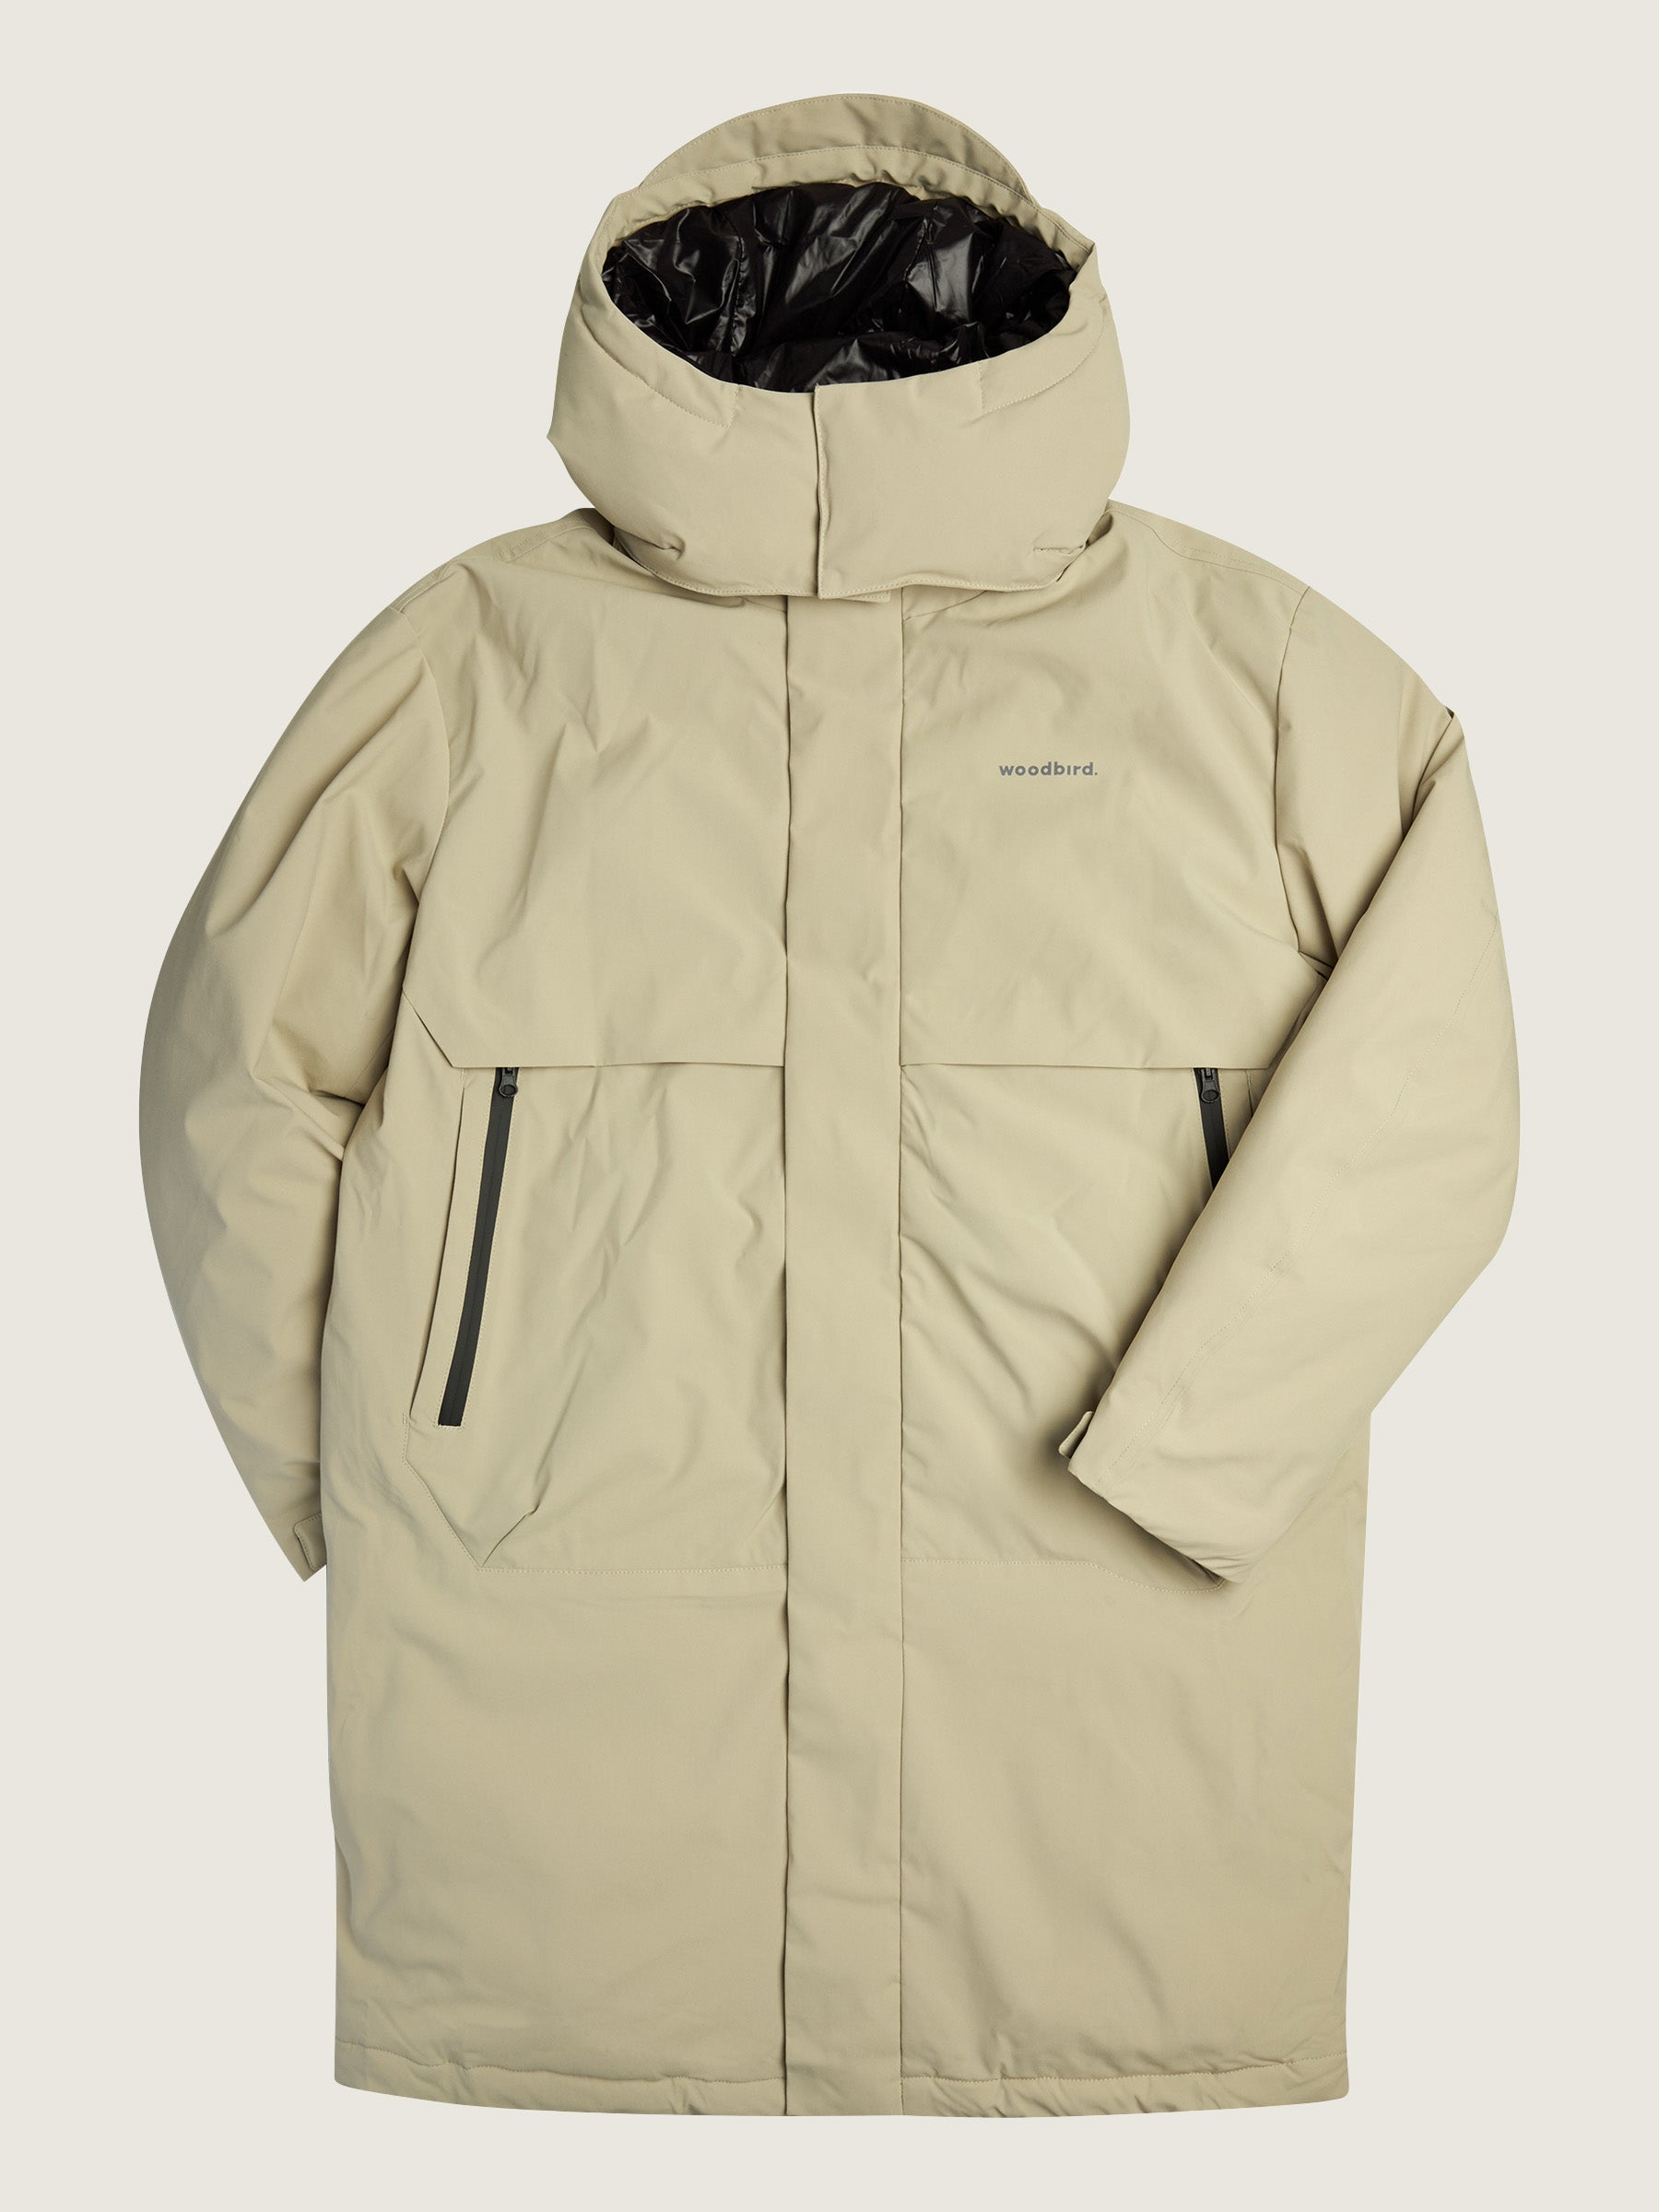 https://woodbird.eu/products/2236-901-wito-long-parka-jacket-outerwear-sand